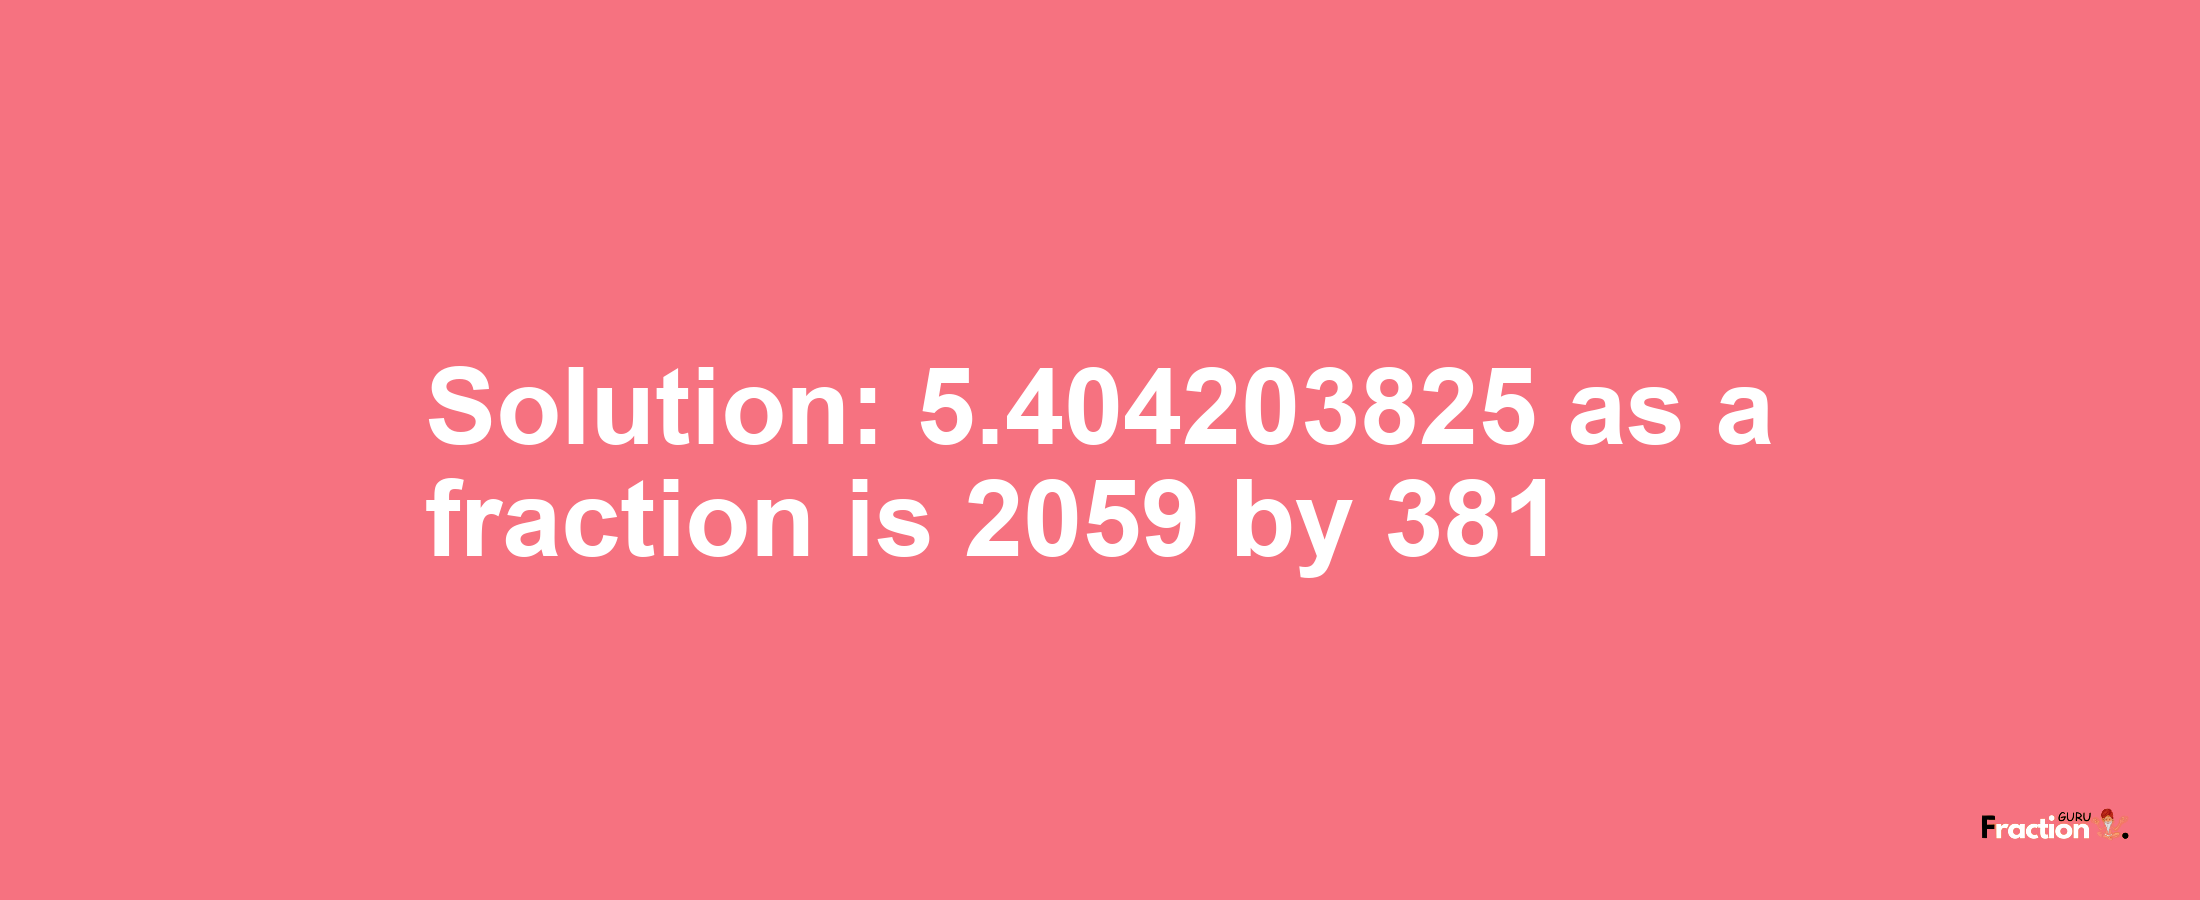 Solution:5.404203825 as a fraction is 2059/381